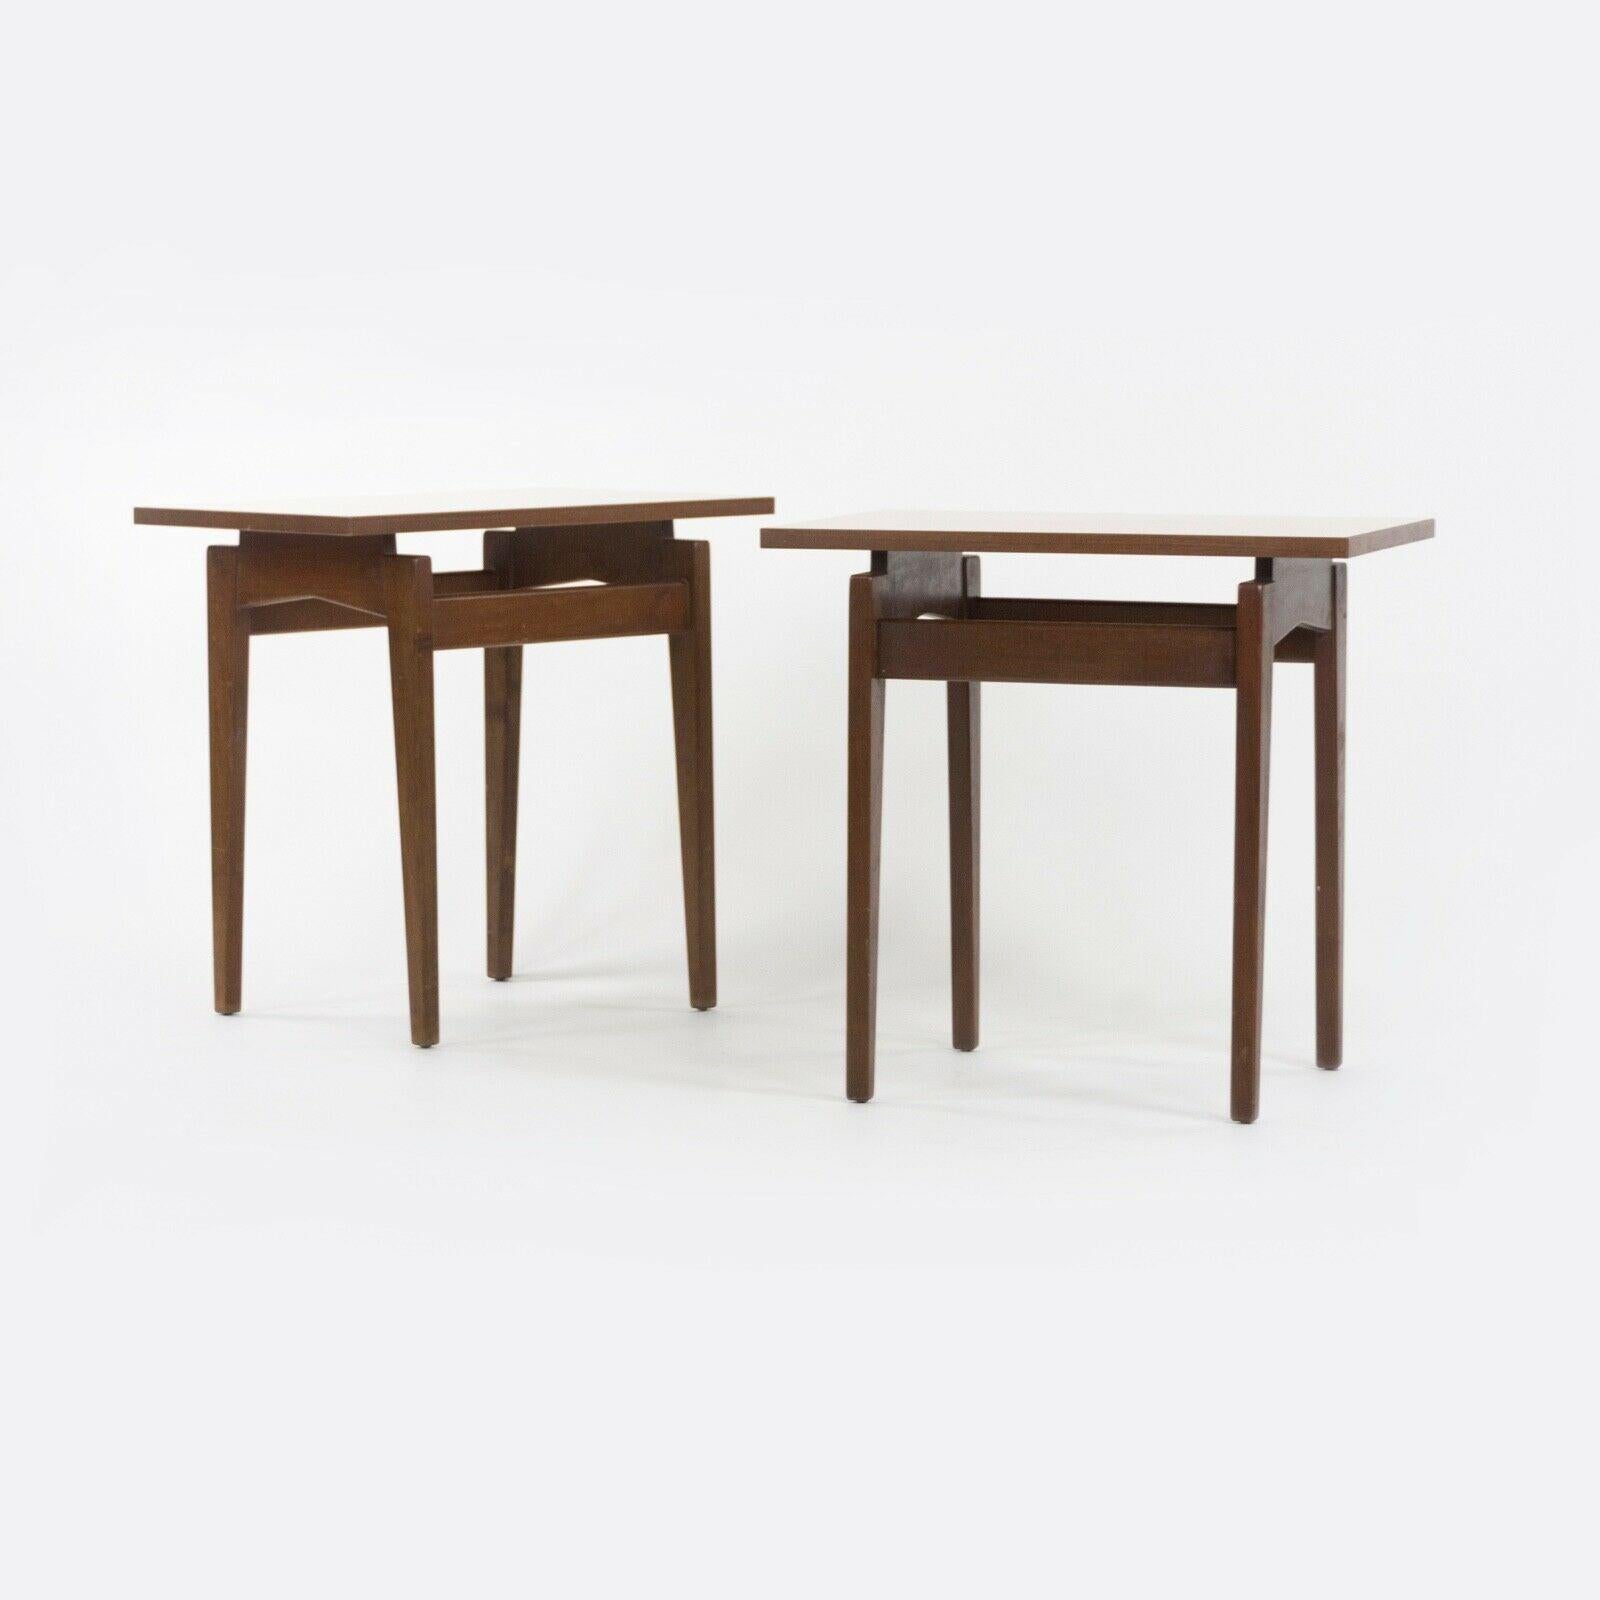 Modern 1950s Pair of Jens Risom Designs Inc Walnut & Laminate End / Side Table For Sale